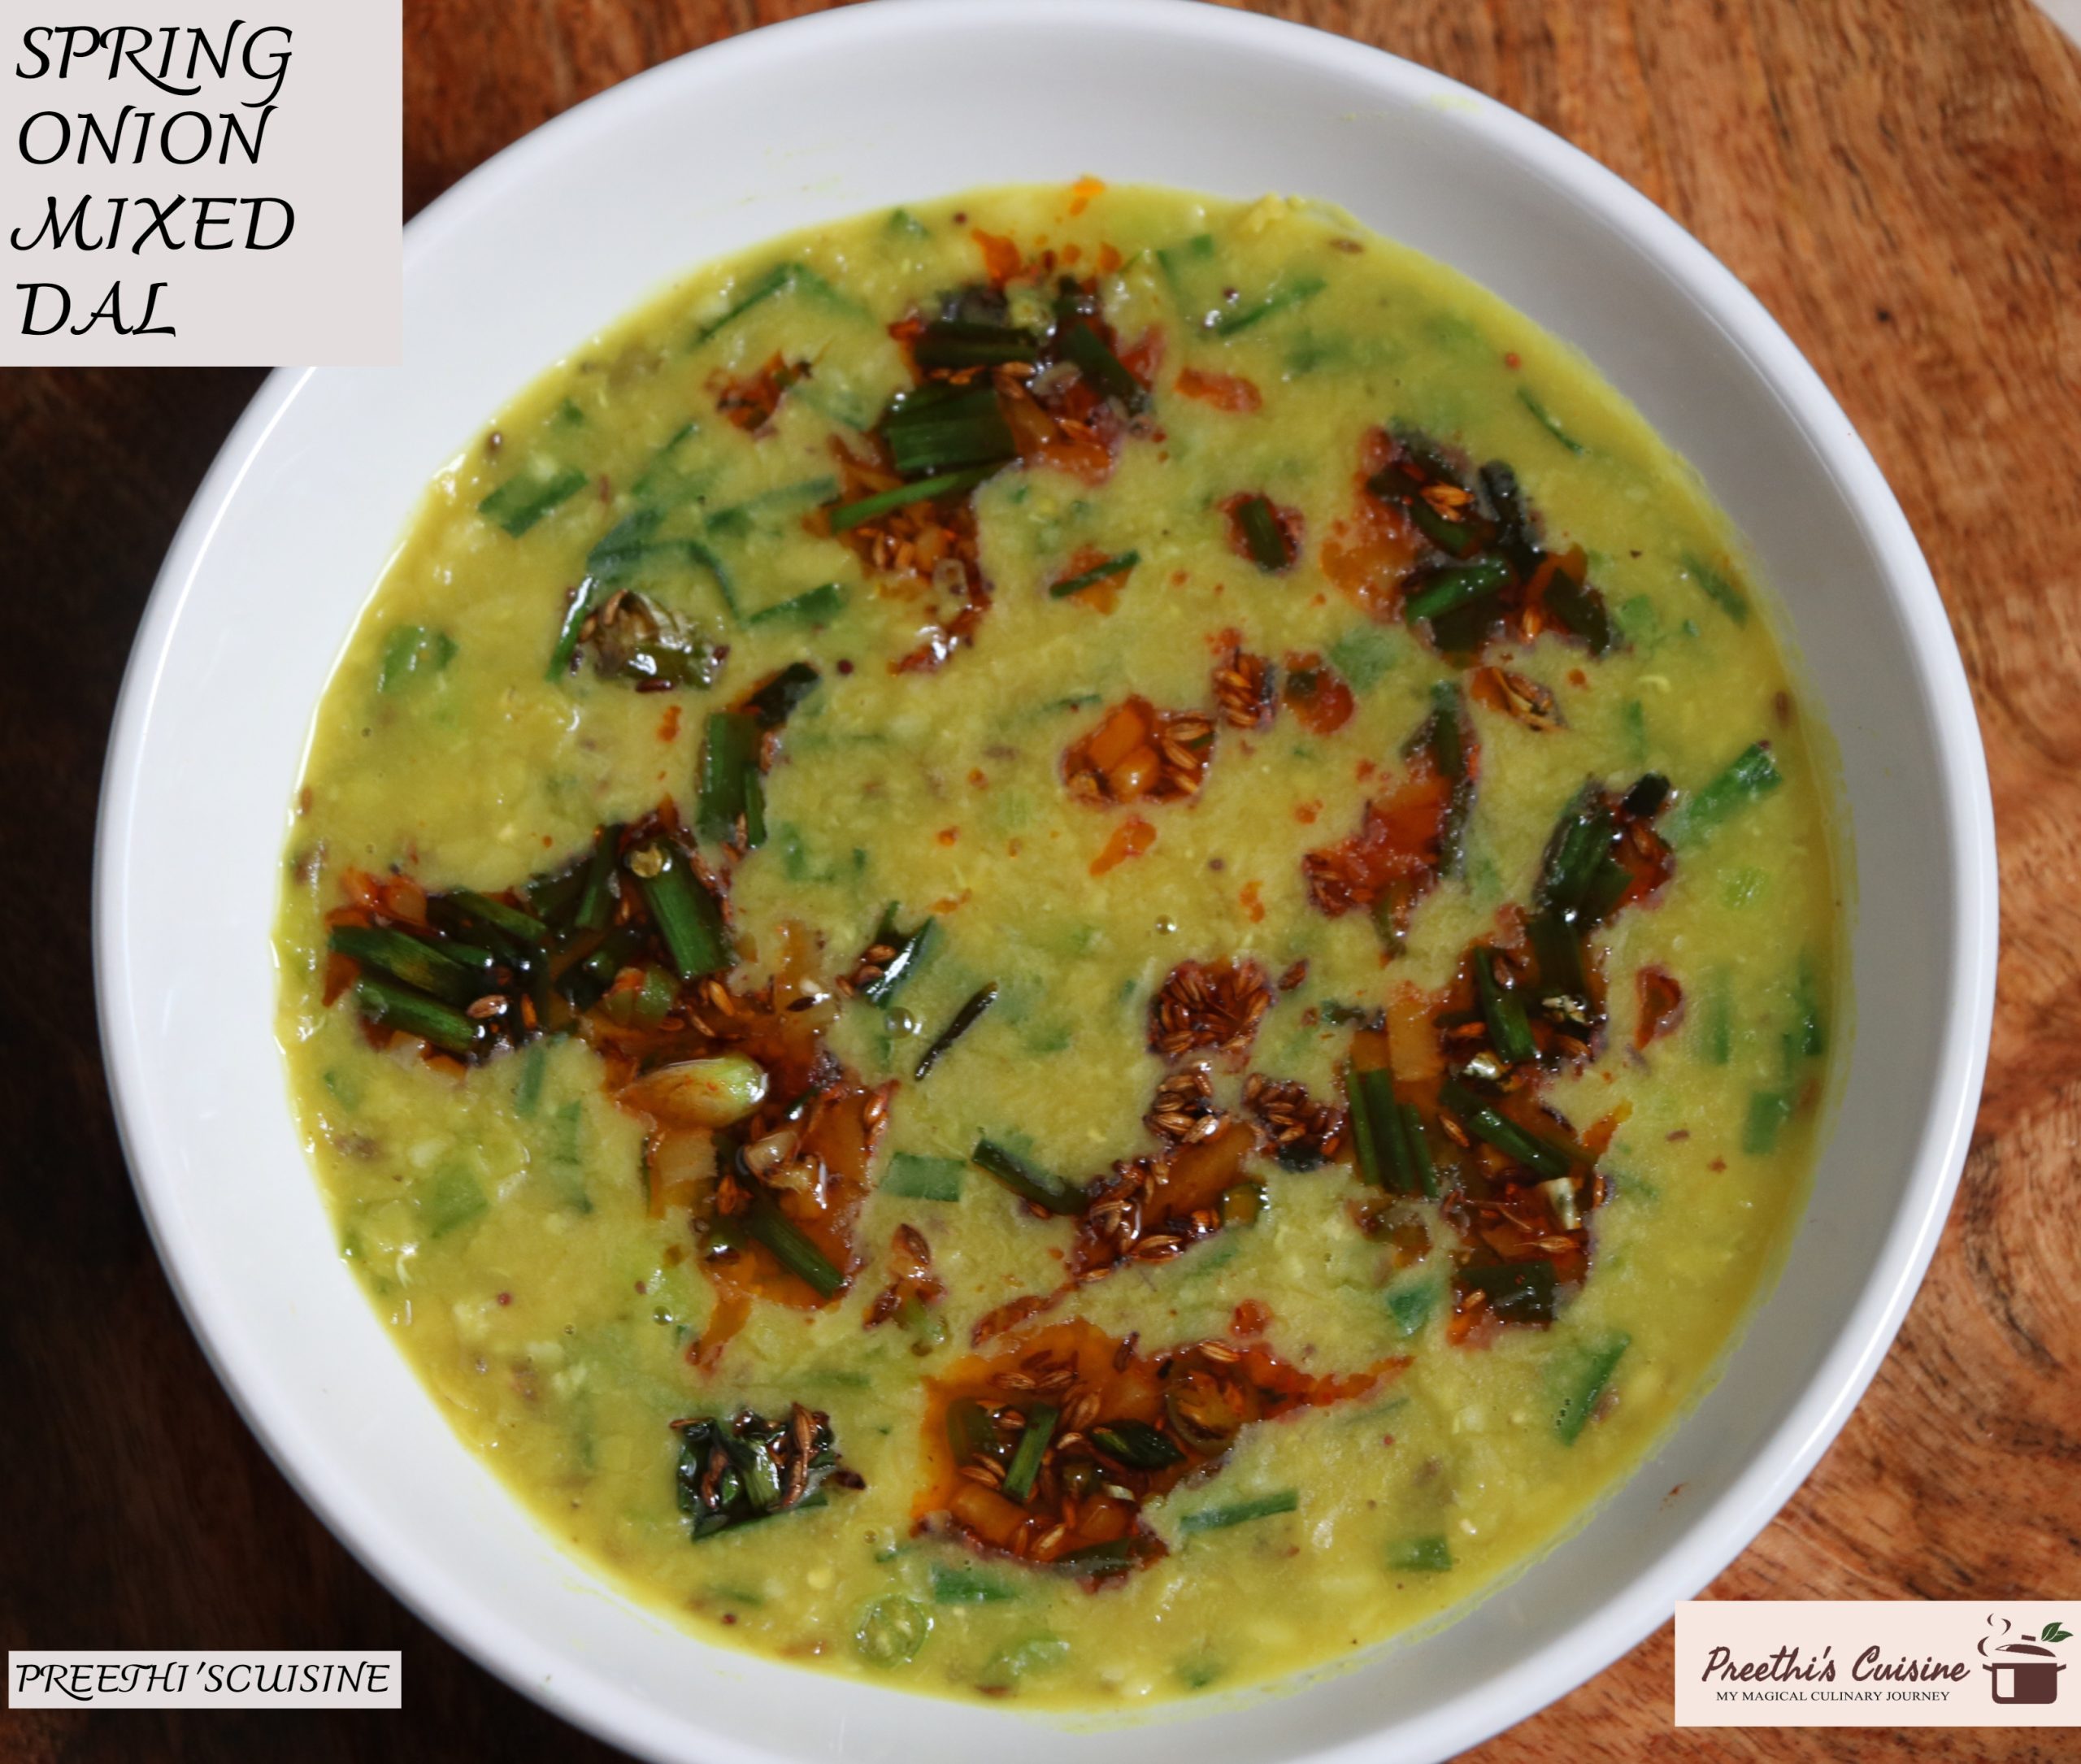 SPRING ONION MIXED  DAL